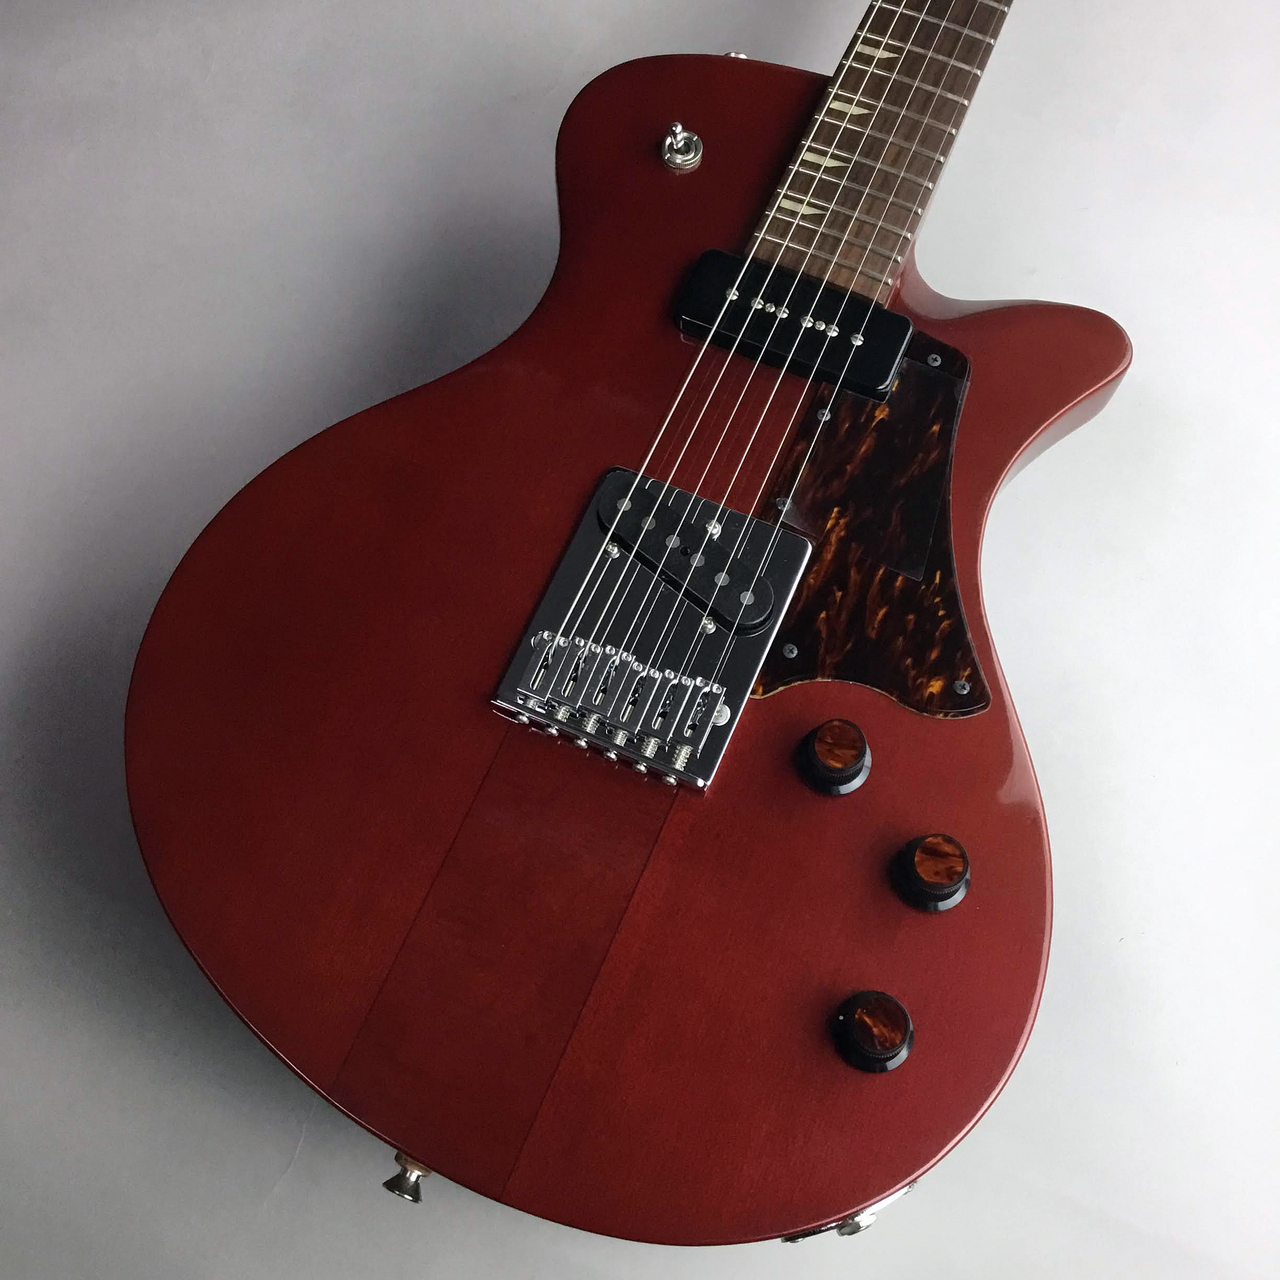 RYOGA BUMBLE-F6V Translucent Pearl Red